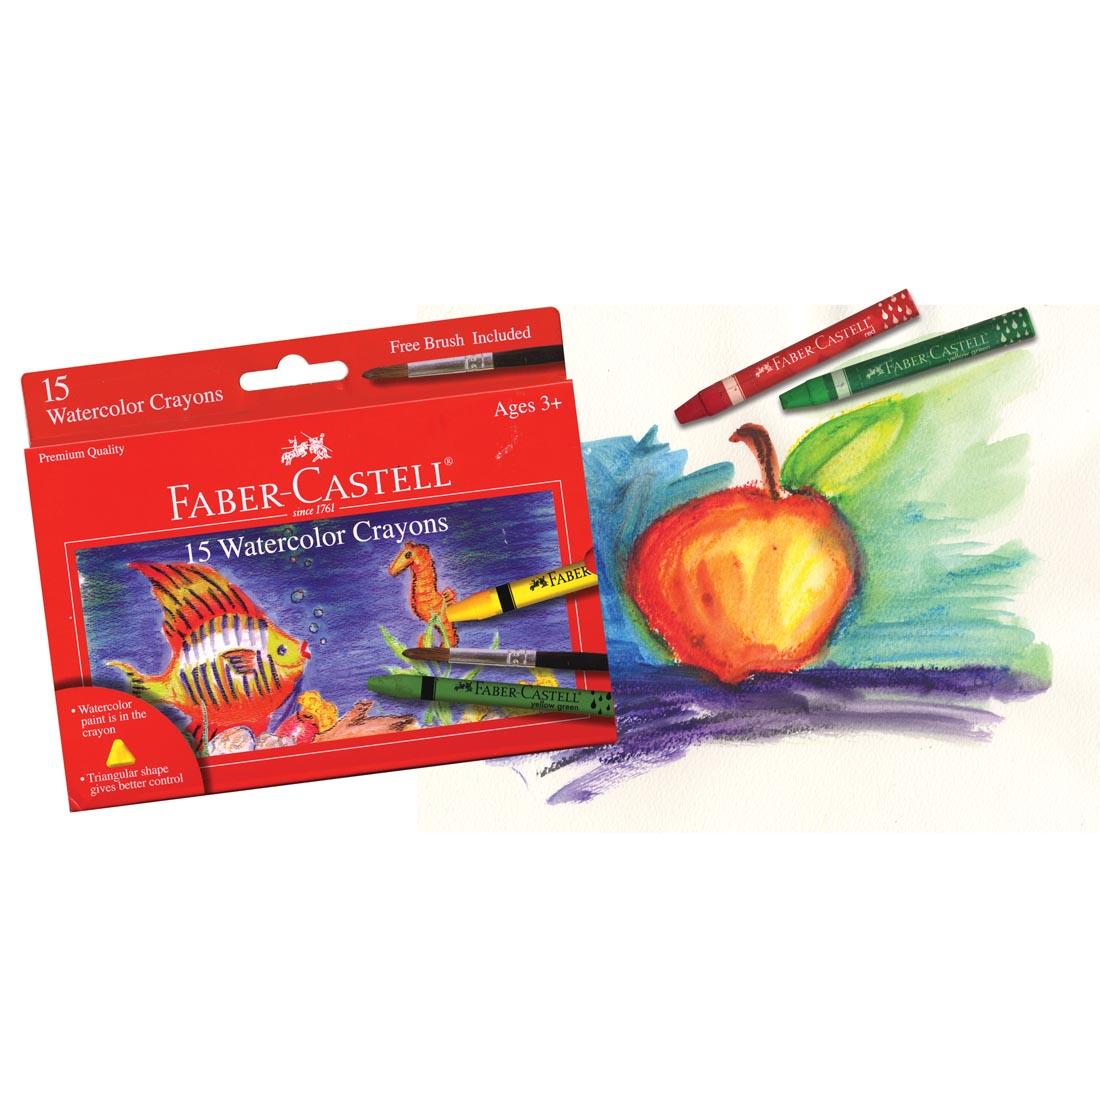 Package of Faber-Castell Watercolor Crayons beside a sample painting